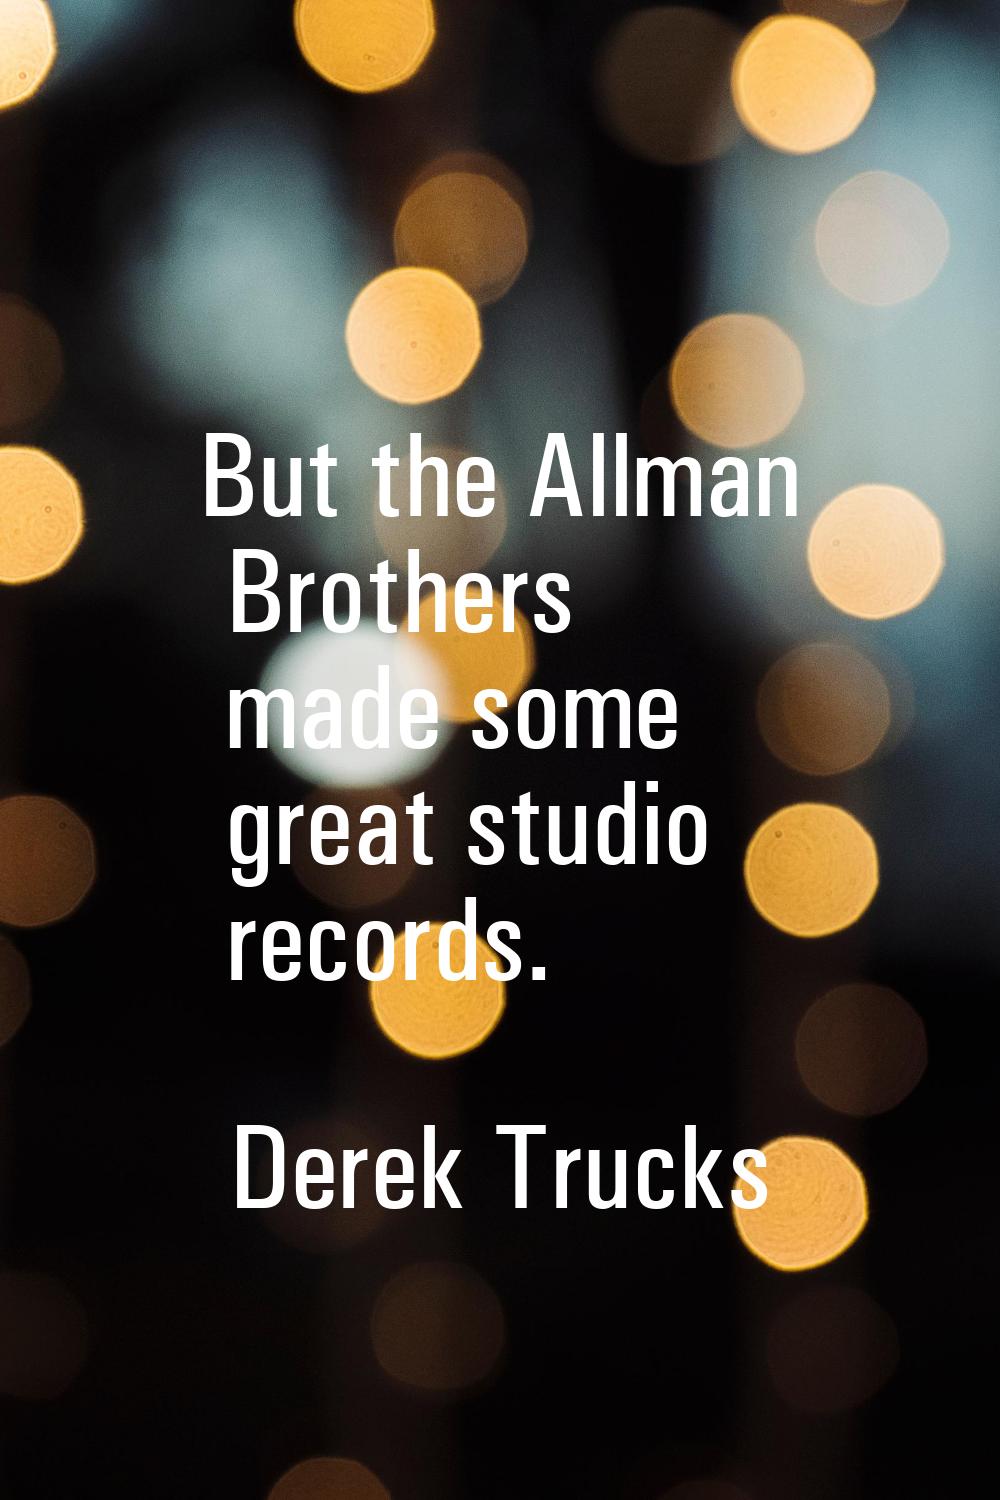 But the Allman Brothers made some great studio records.